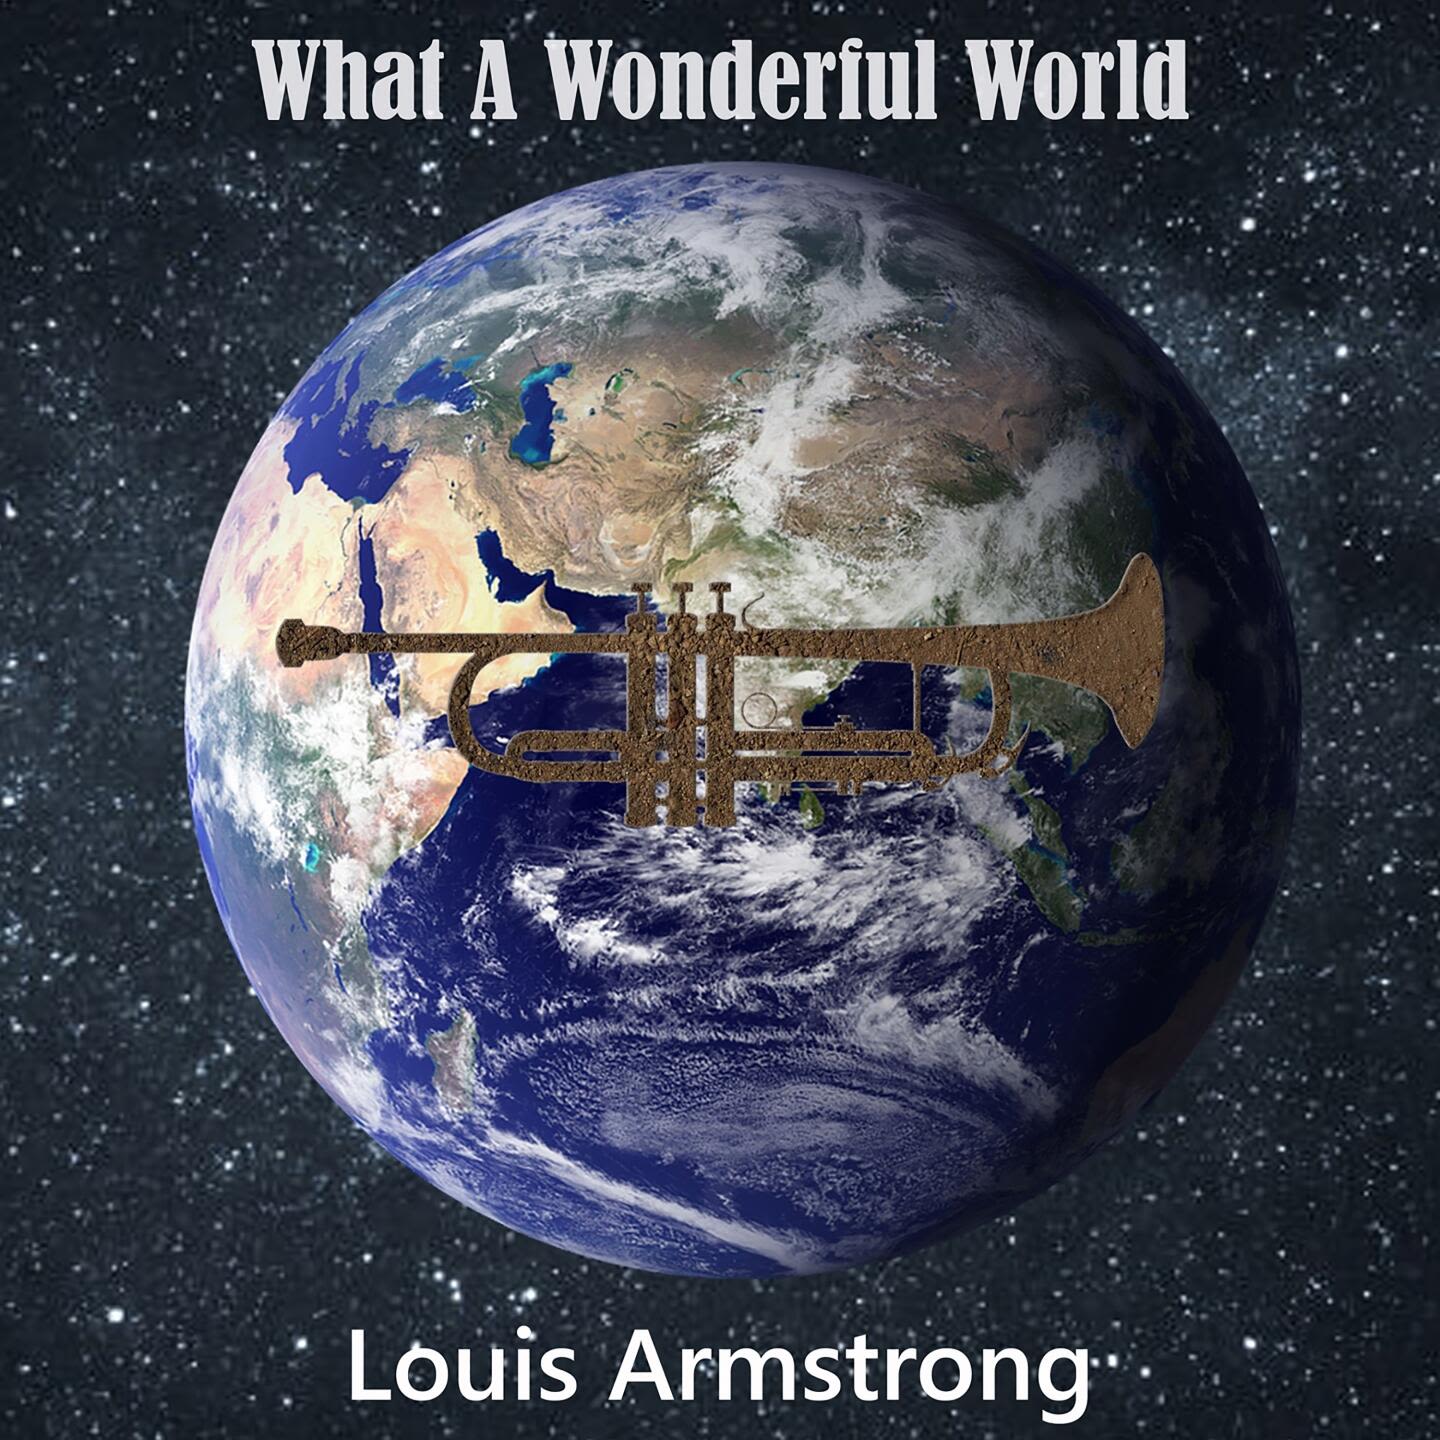 Louis Armstrong - What A Wonderful World | iHeart